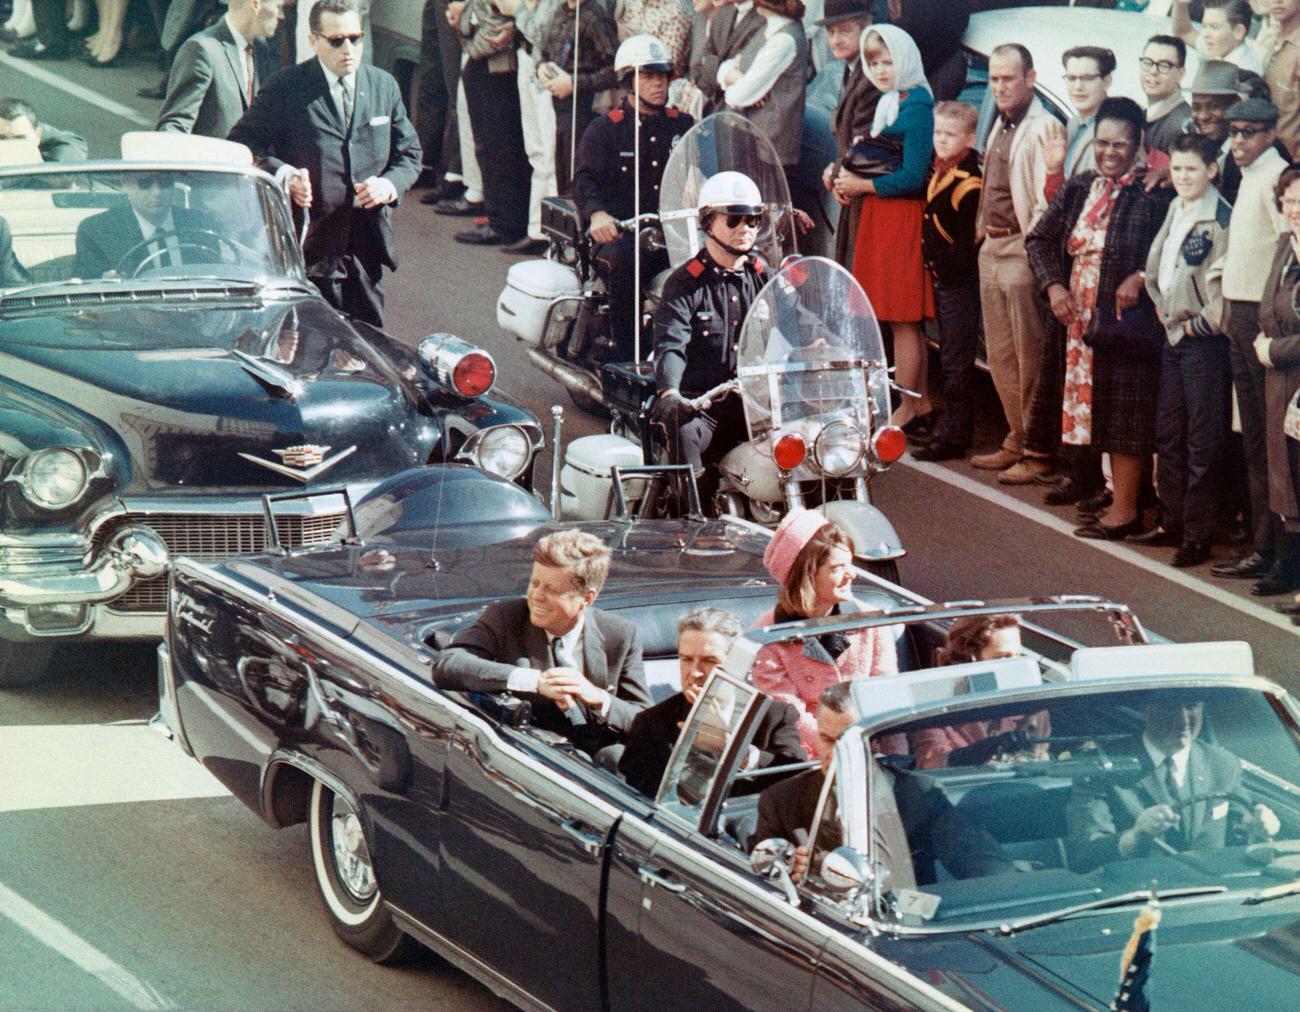 John F. Kennedy, First Lady Jacqueline Kennedy, Texas Governor John Connally, and others in a Dallas motorcade, minutes before the assassination, 1963.